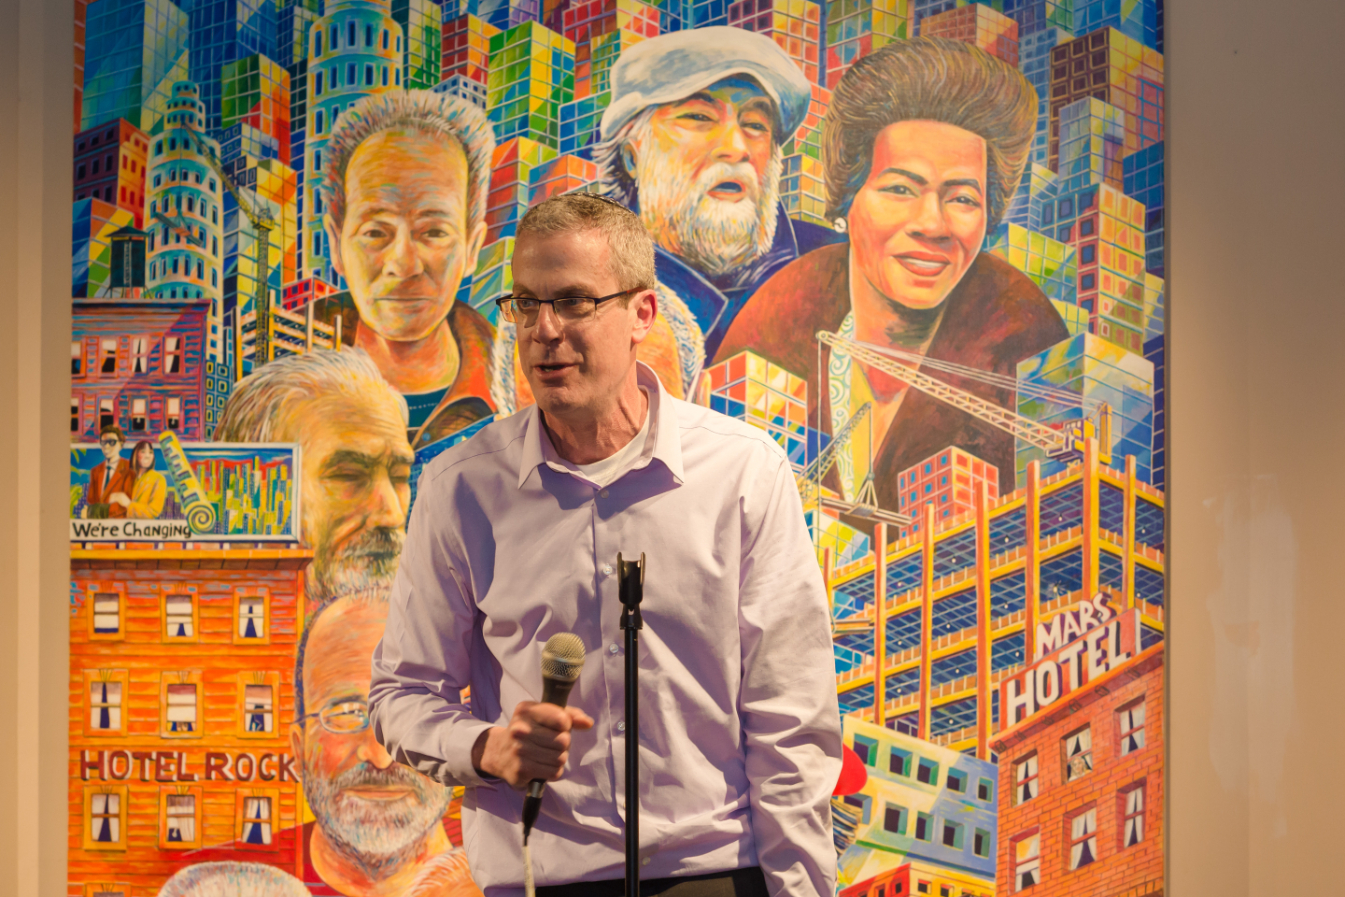 Executive Director Jeffrey Spitz Cohan speaking with a microphone in front of a vibrant painting featuring people and buildings.